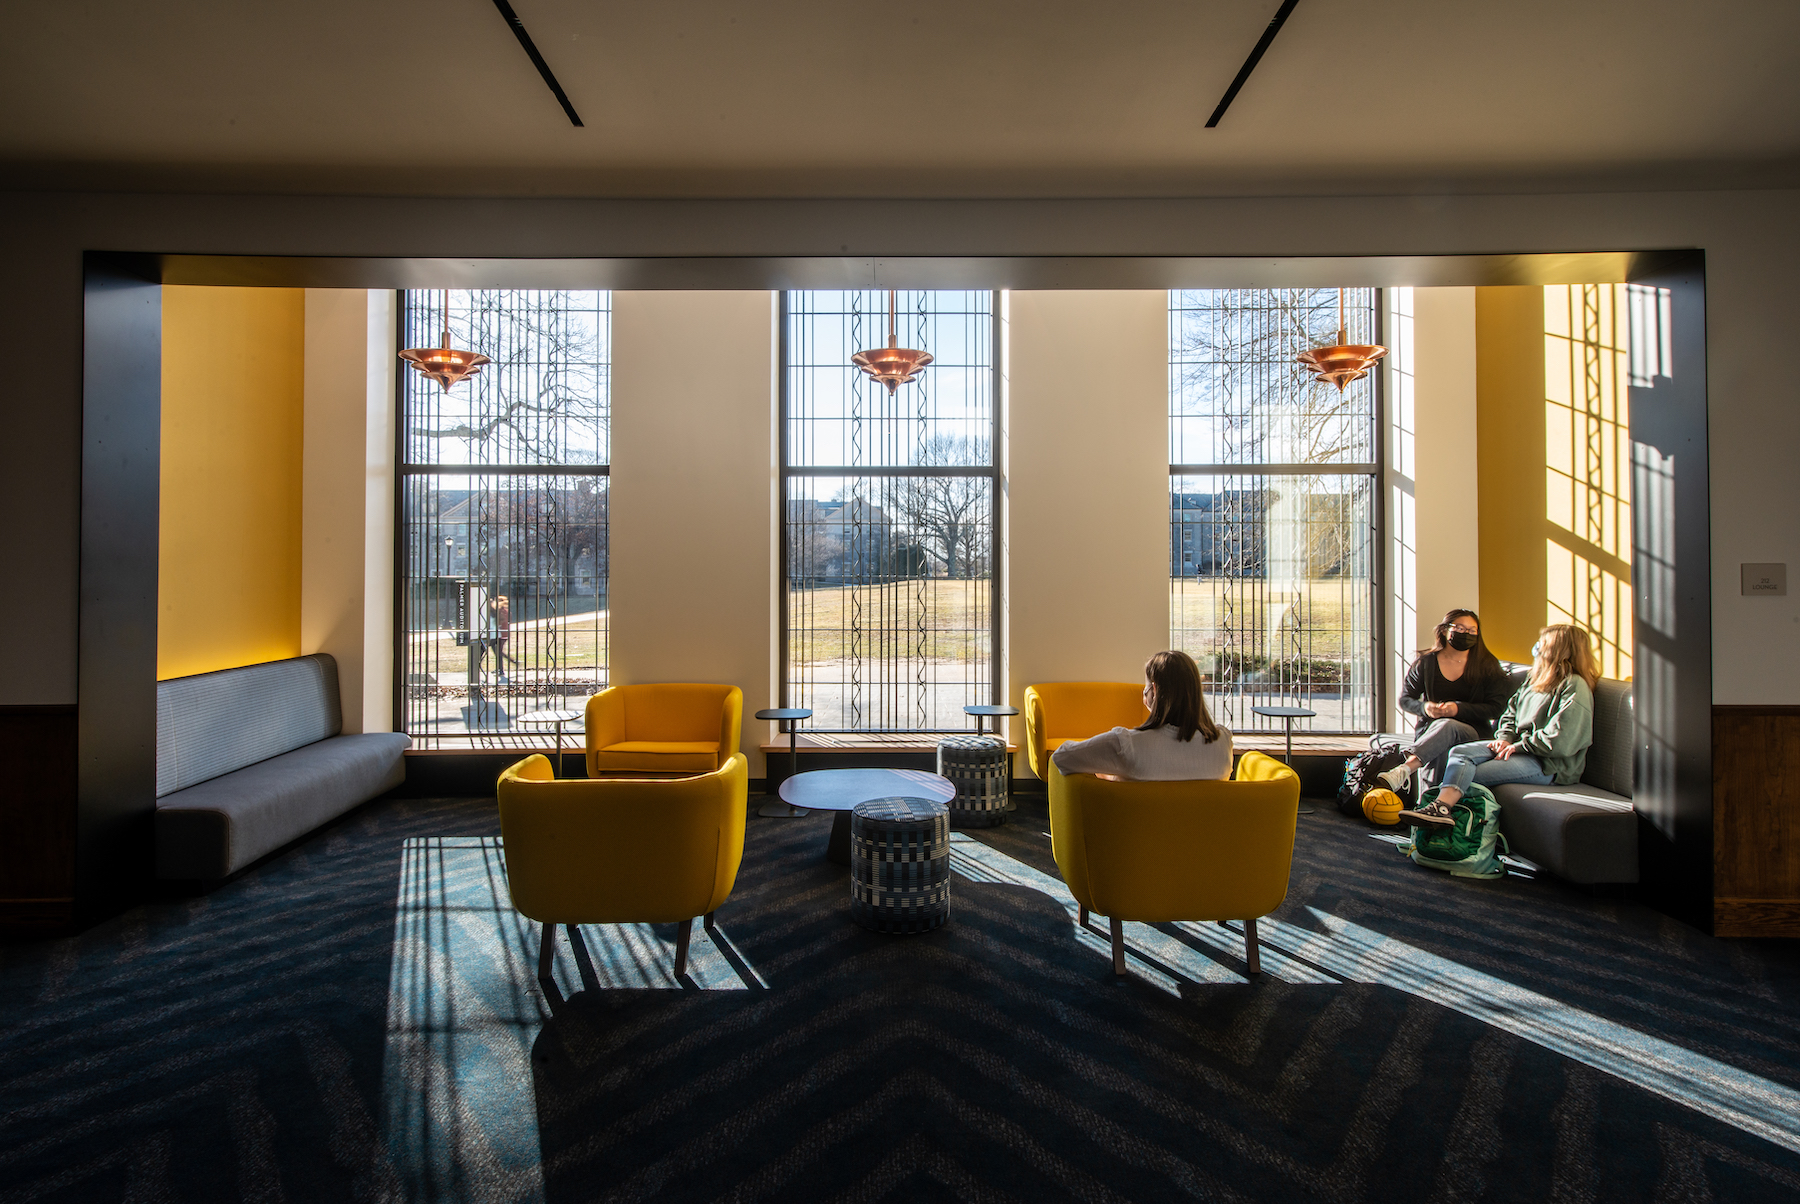 The building's lobby features new furniture and large windows